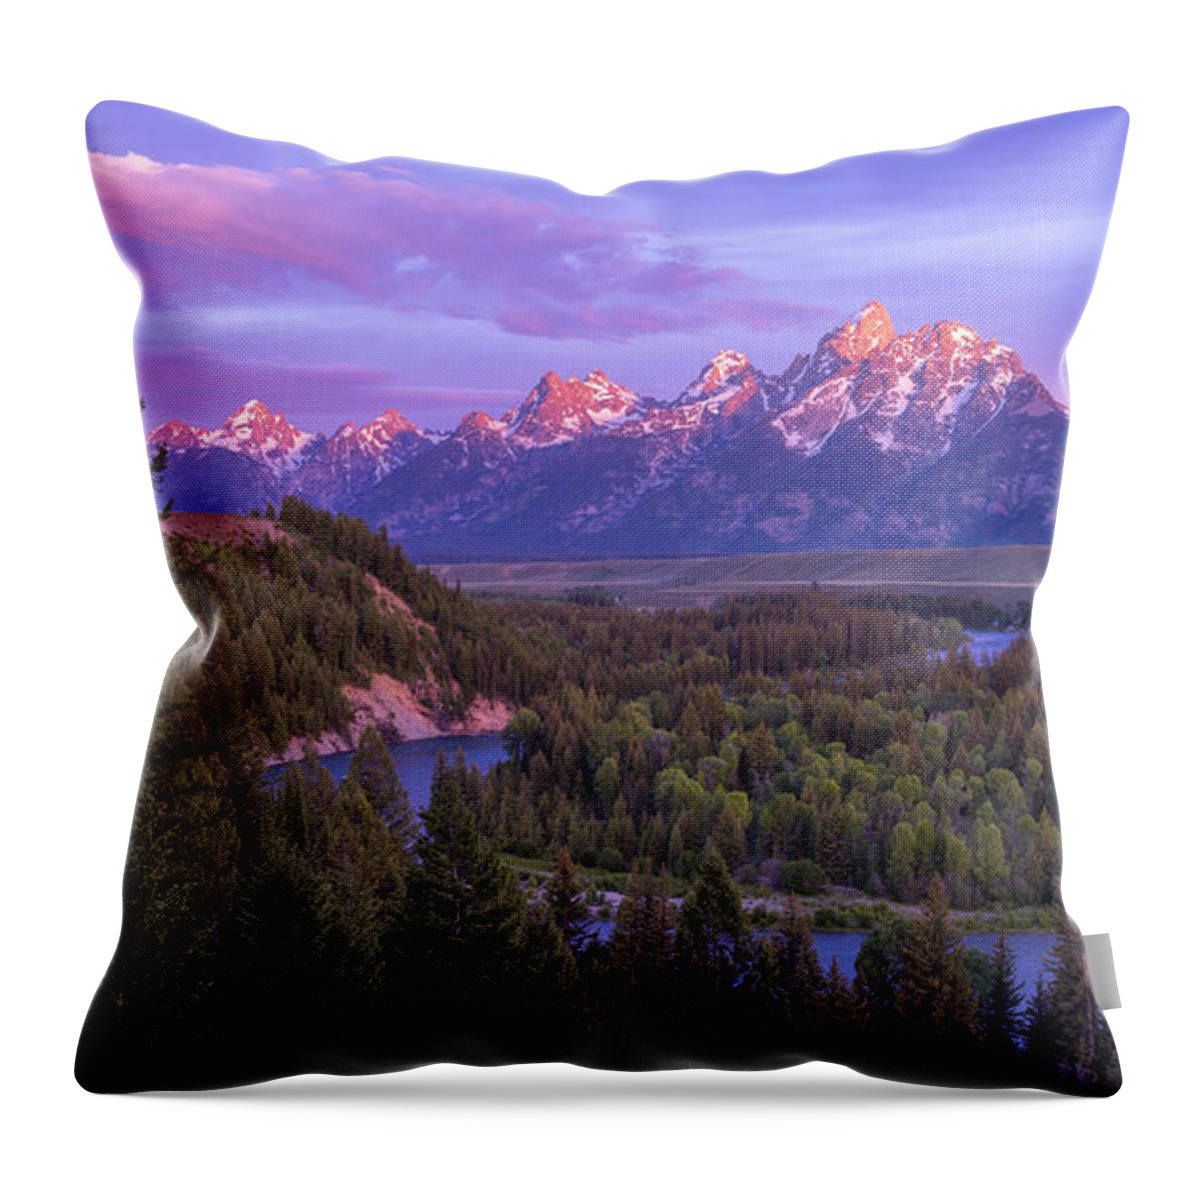 Admiration Throw Pillow featuring the photograph Admiration by Chad Dutson